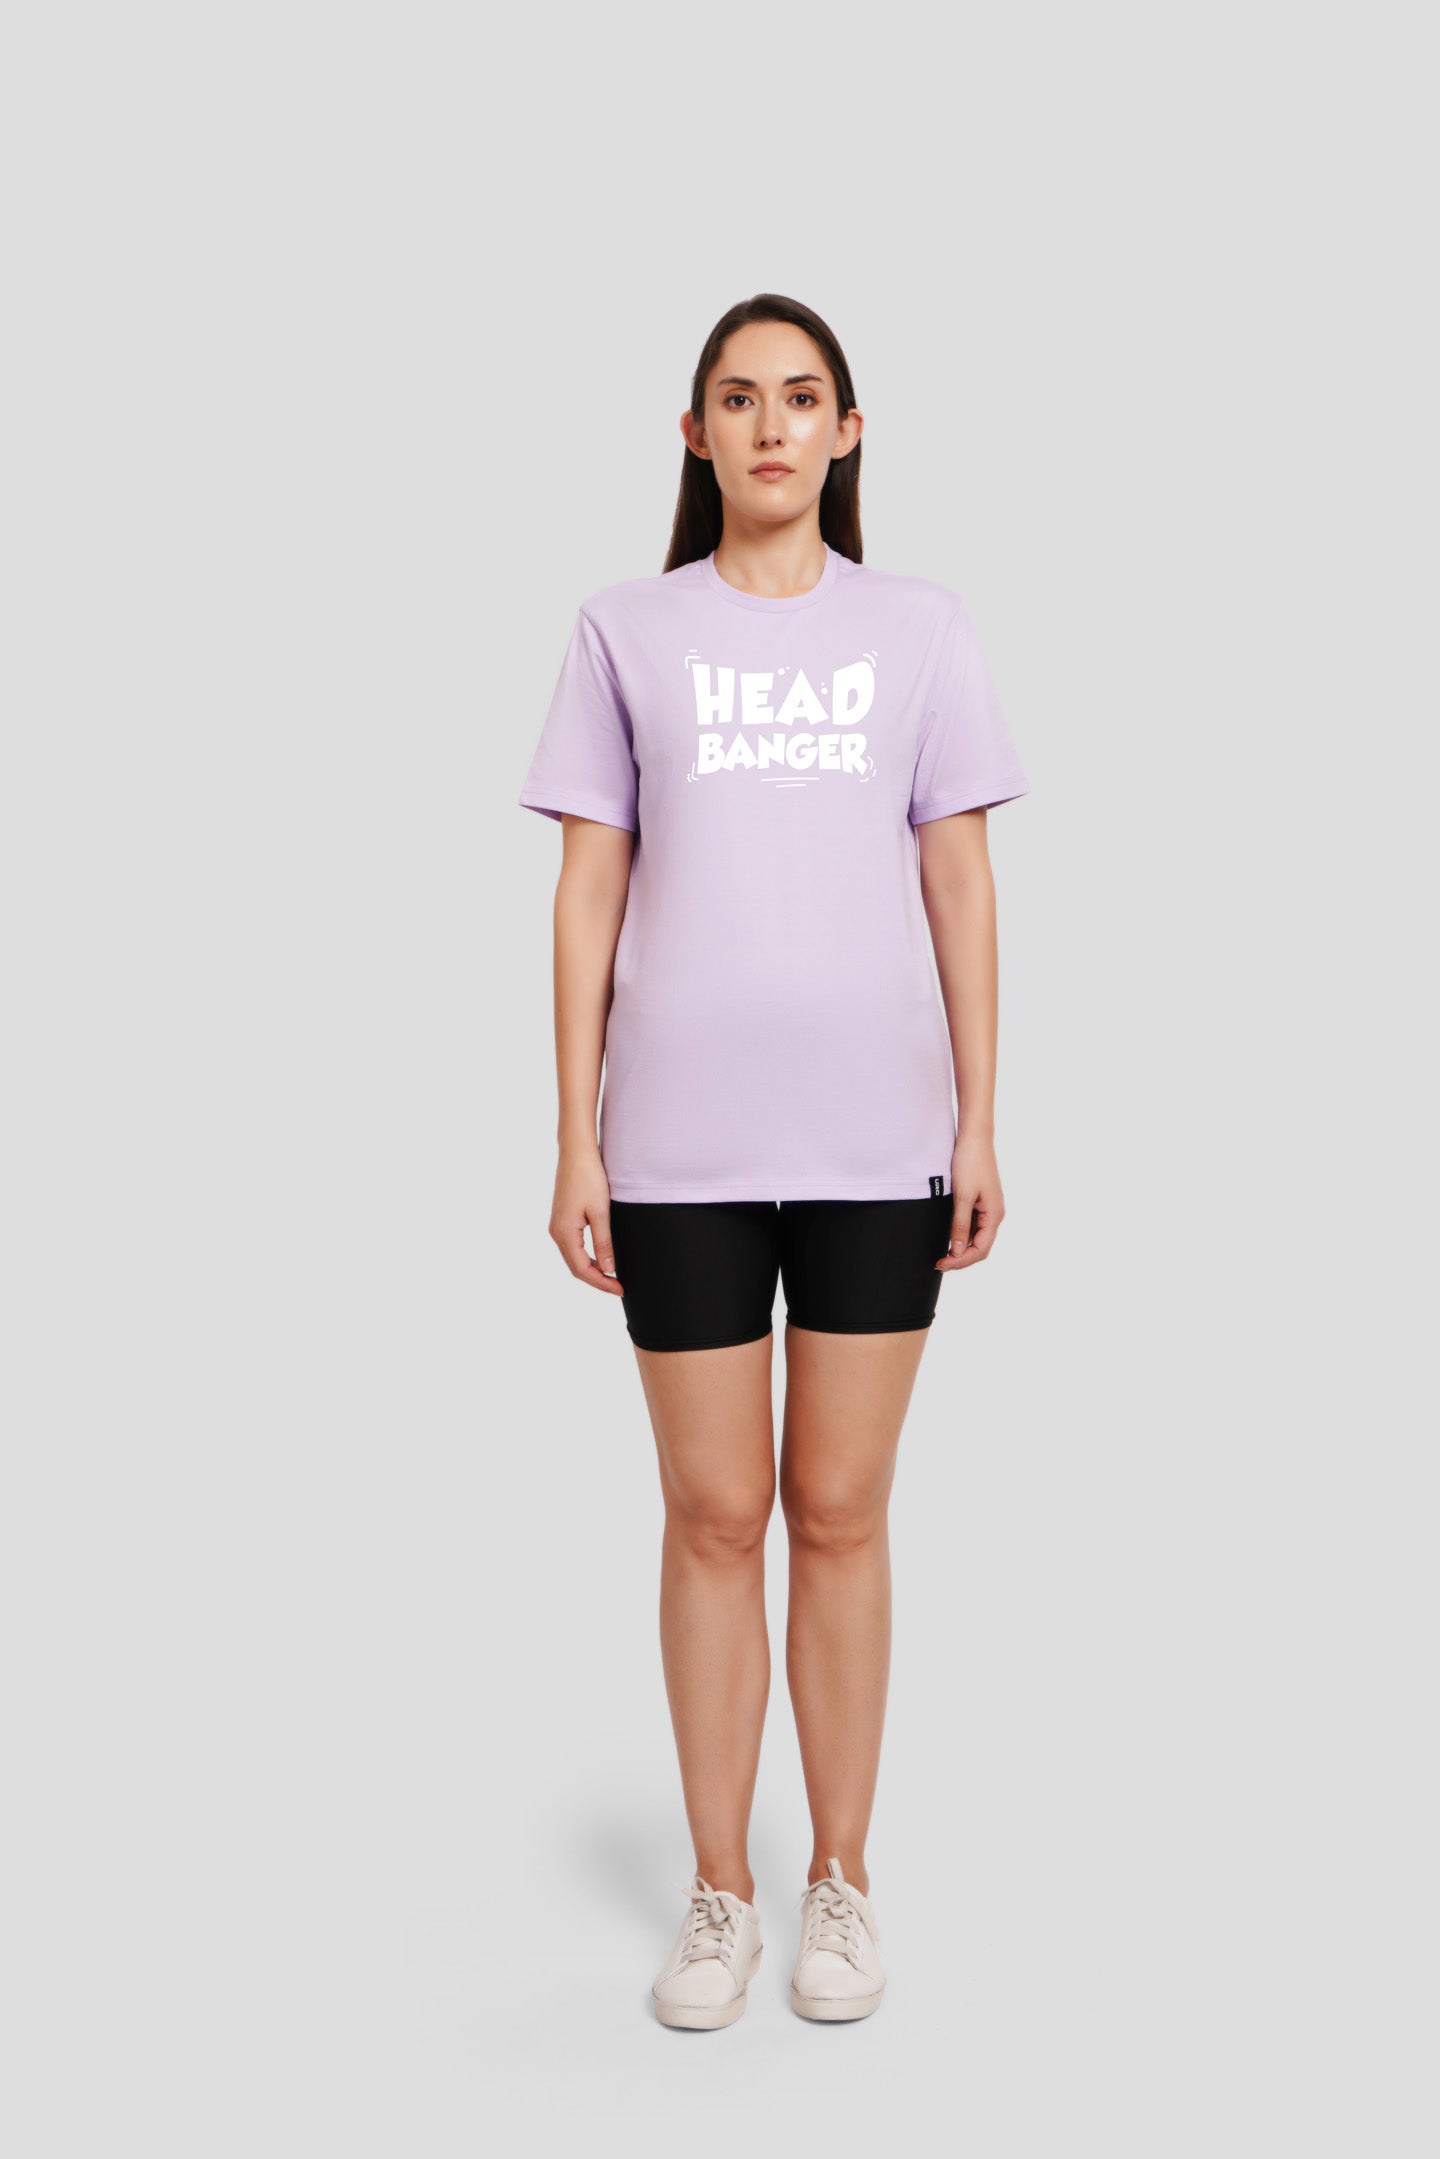 Head Banger Lilac Printed T Shirt Women Boyfriend Fit With Front Design Pic 1